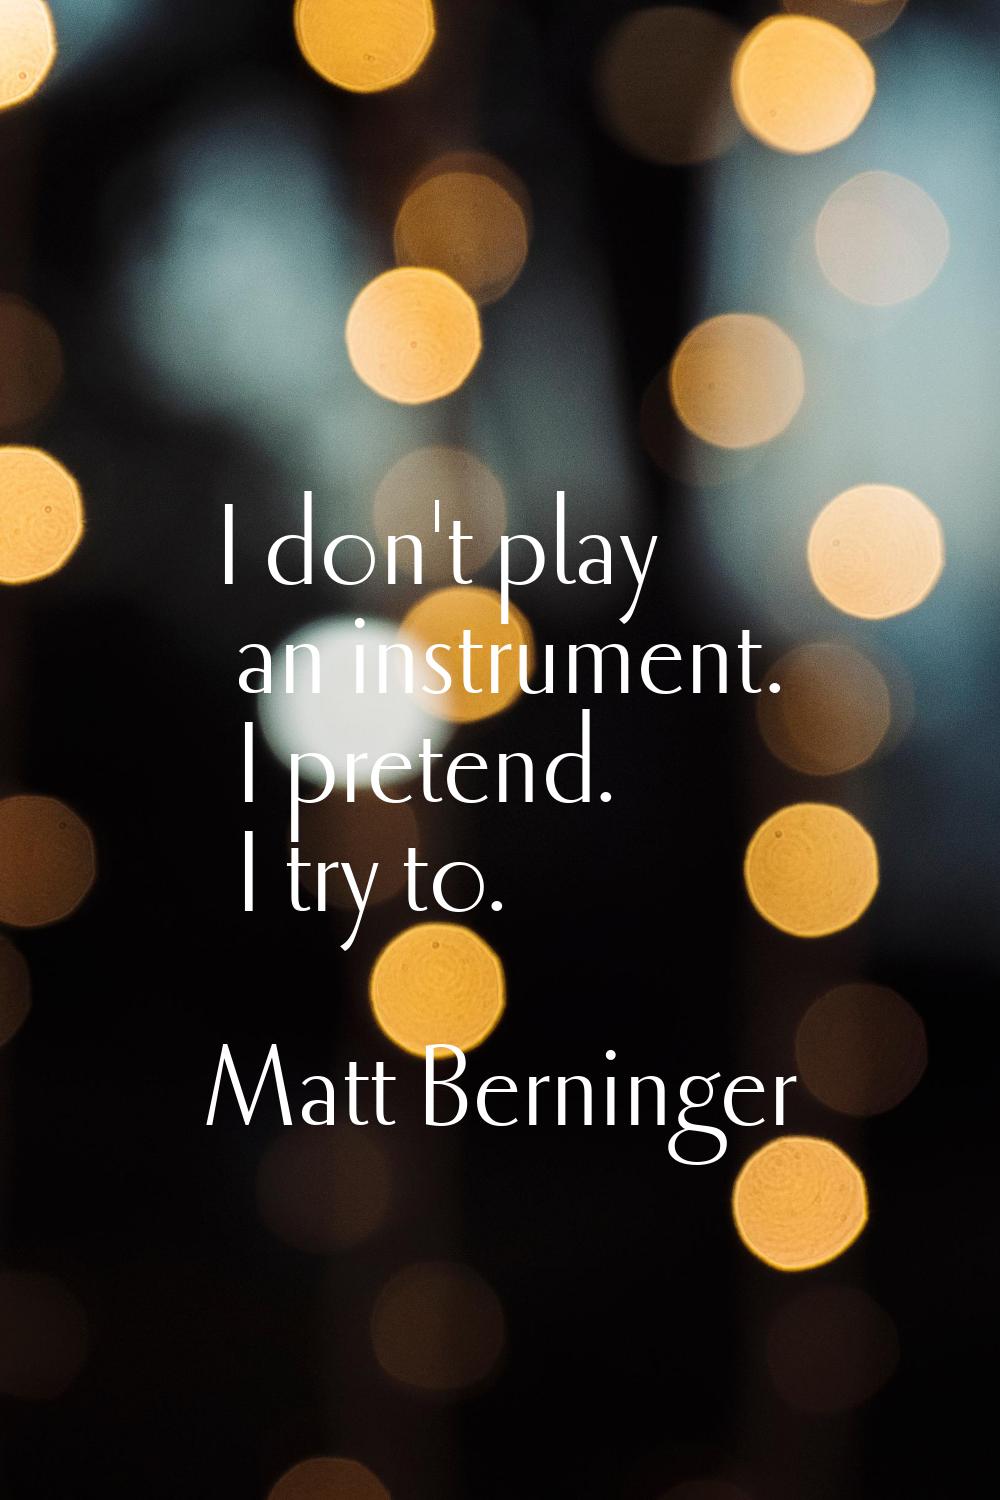 I don't play an instrument. I pretend. I try to.